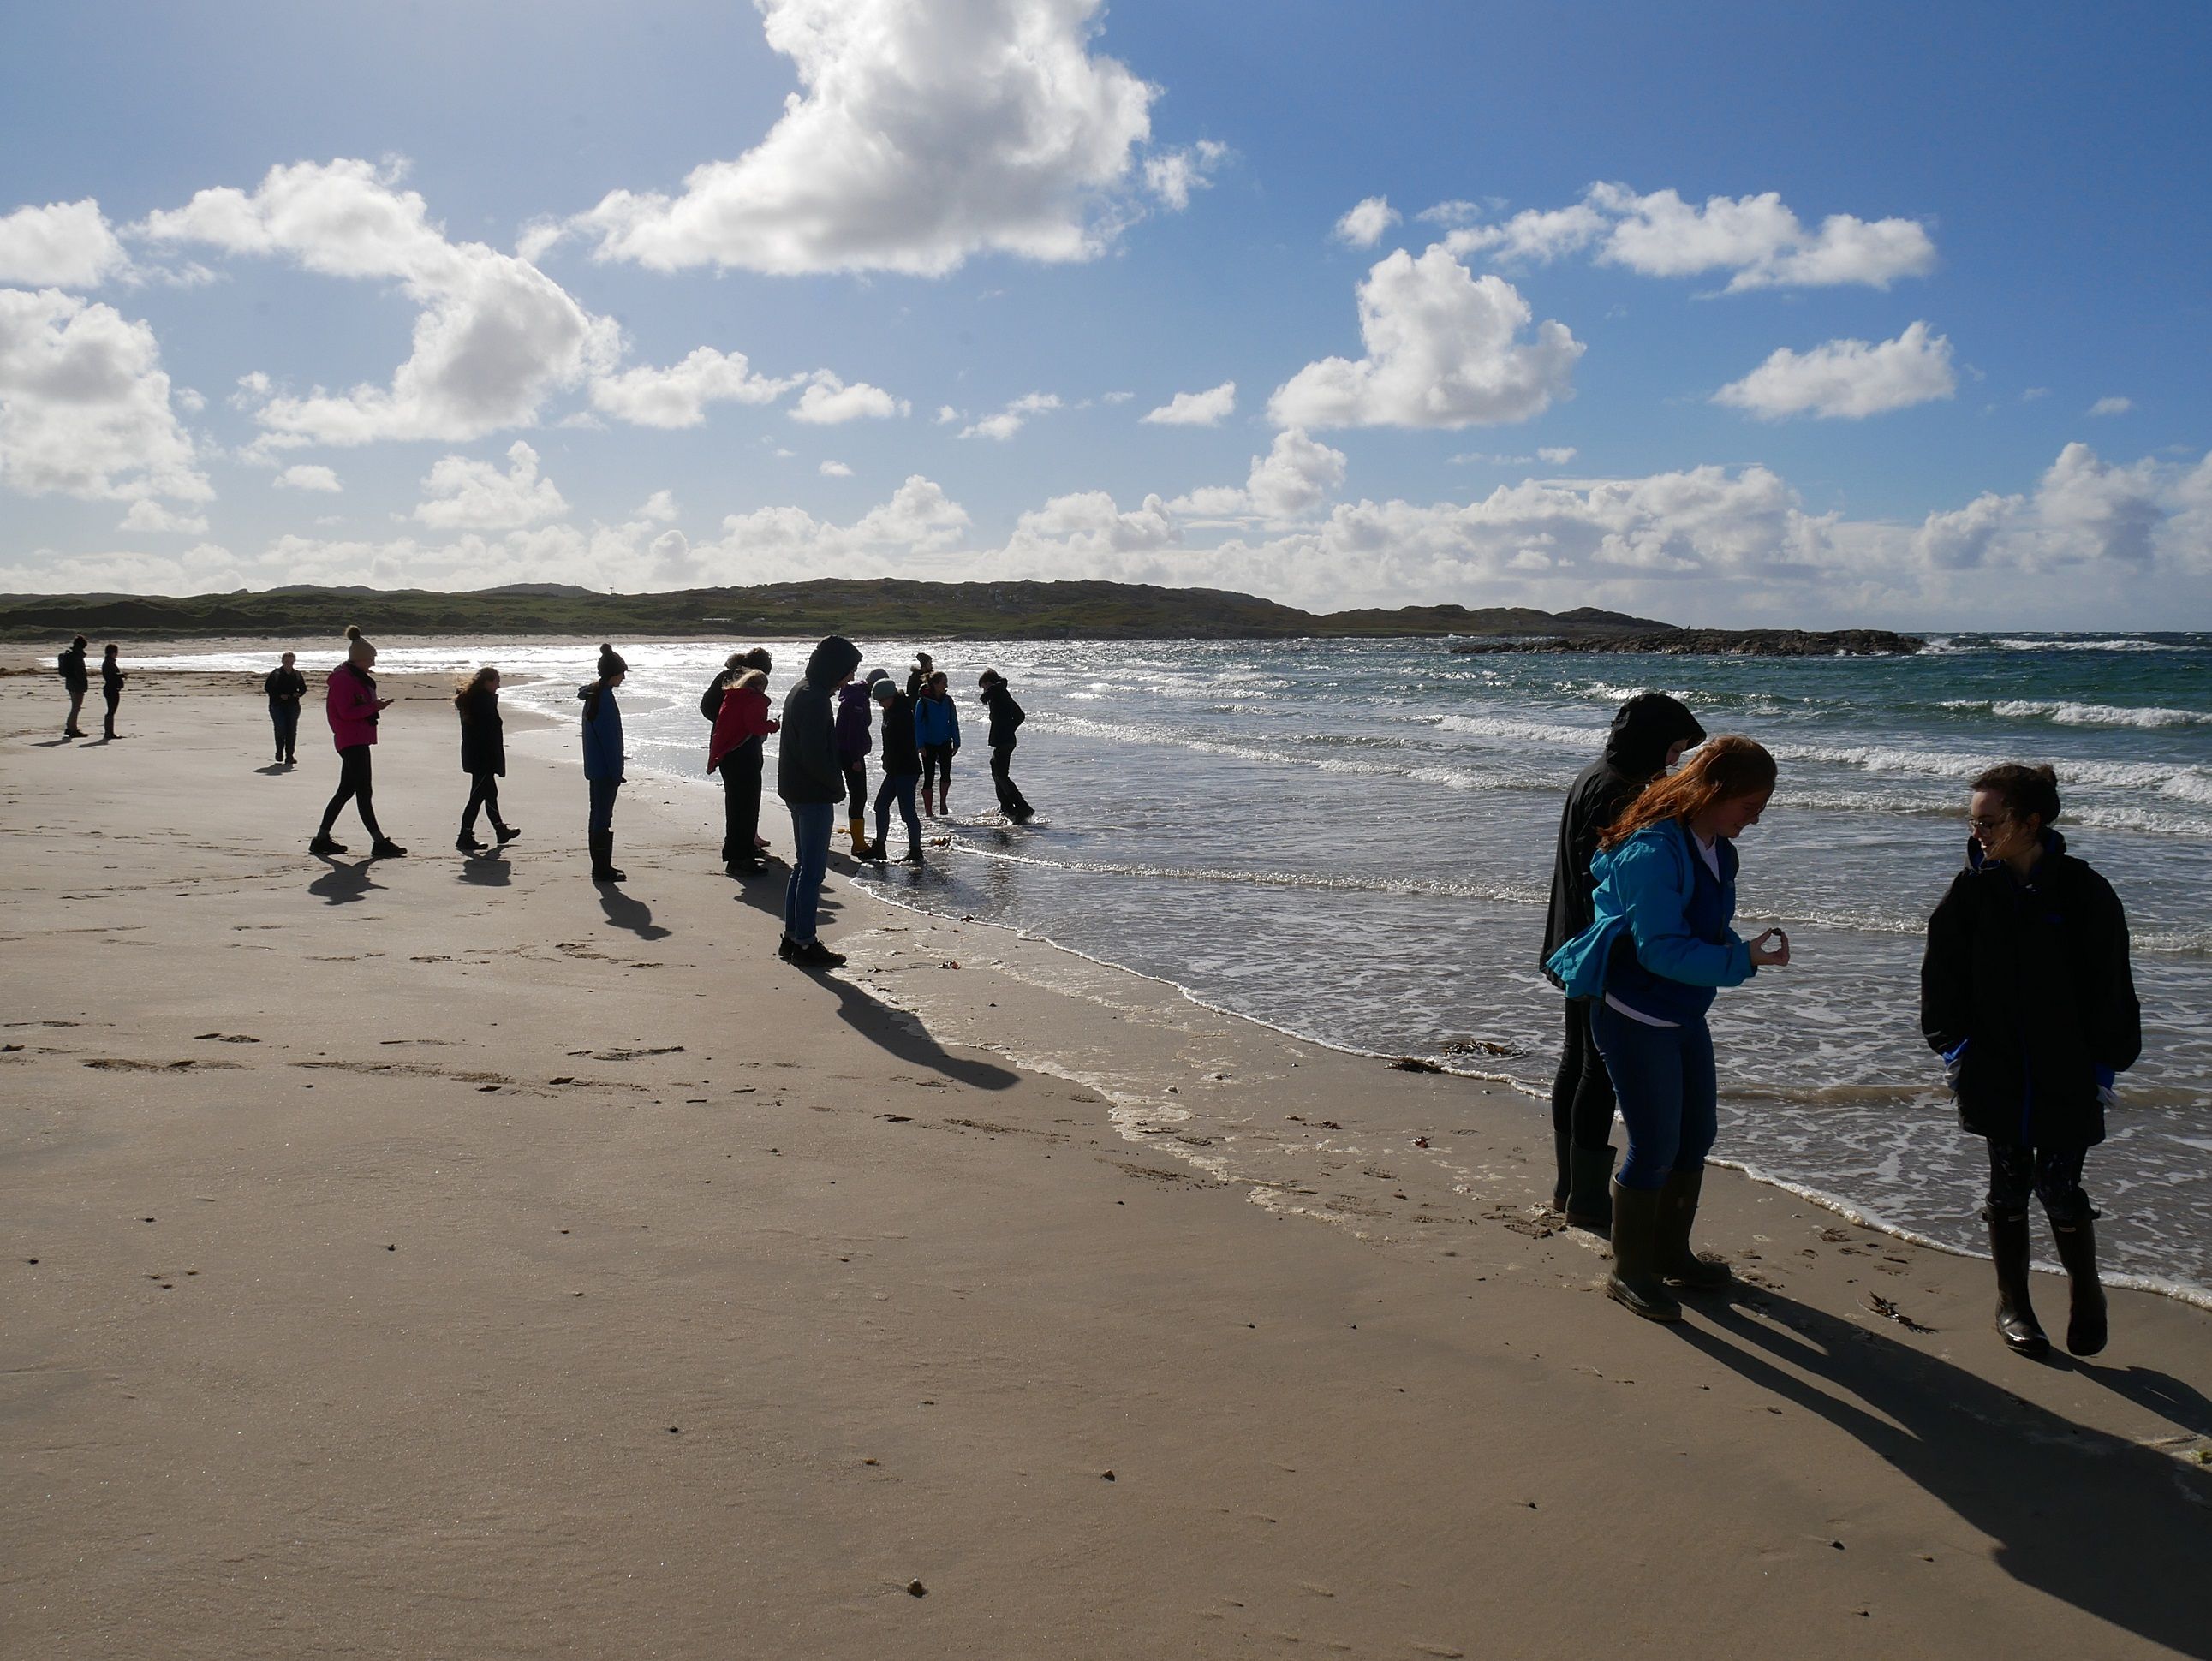 Students walking on a beach